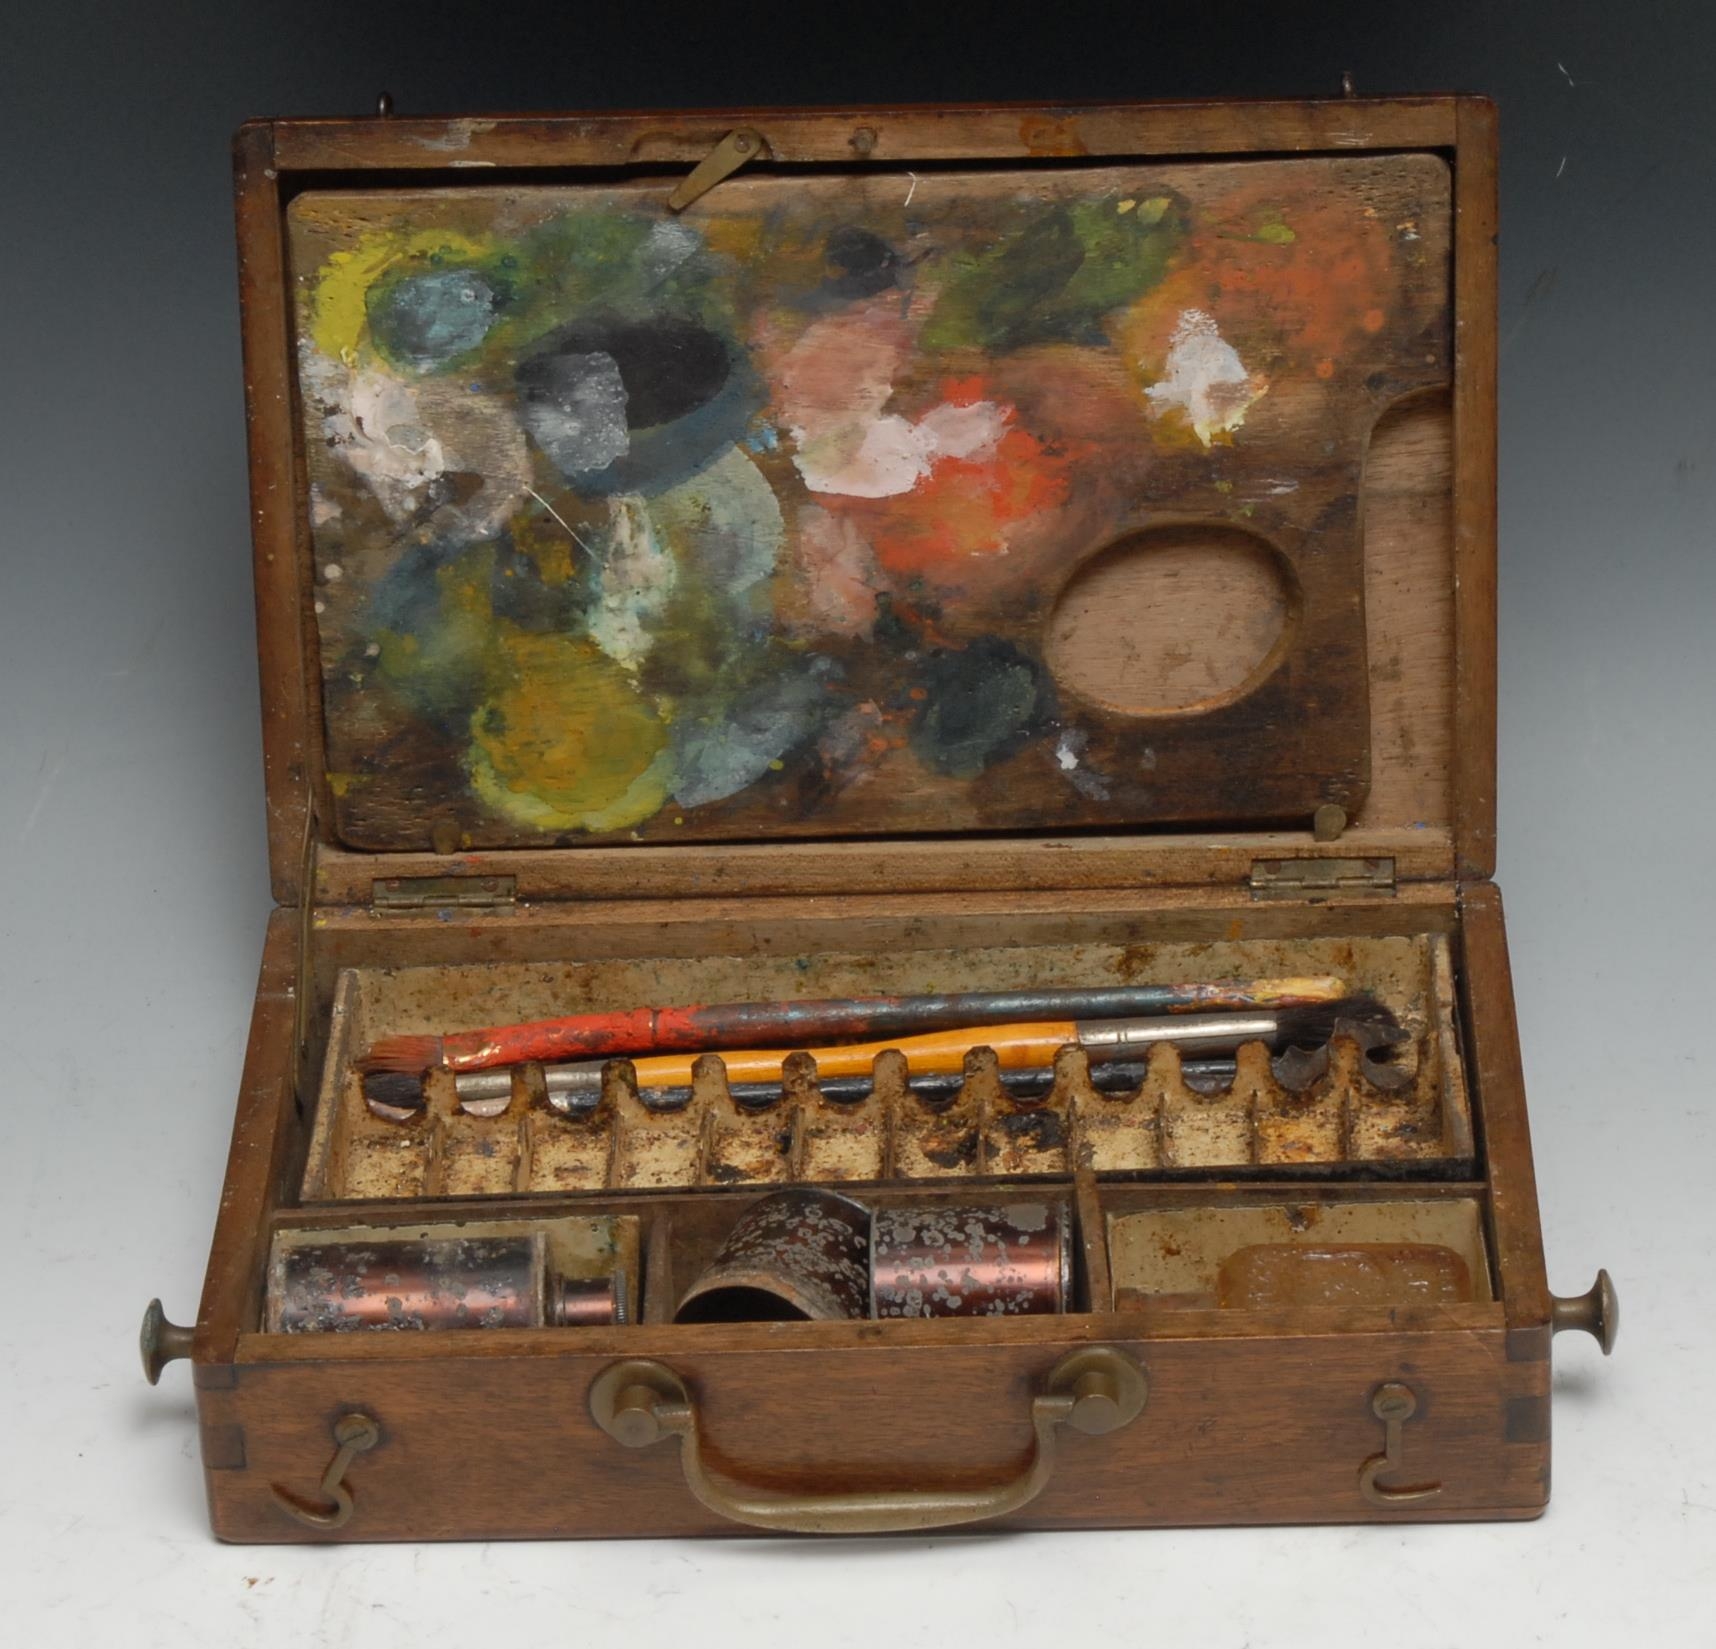 A late 19th century mahogany artist's paint box, hinged cover enclosing a palette, tube rack and - Image 2 of 2